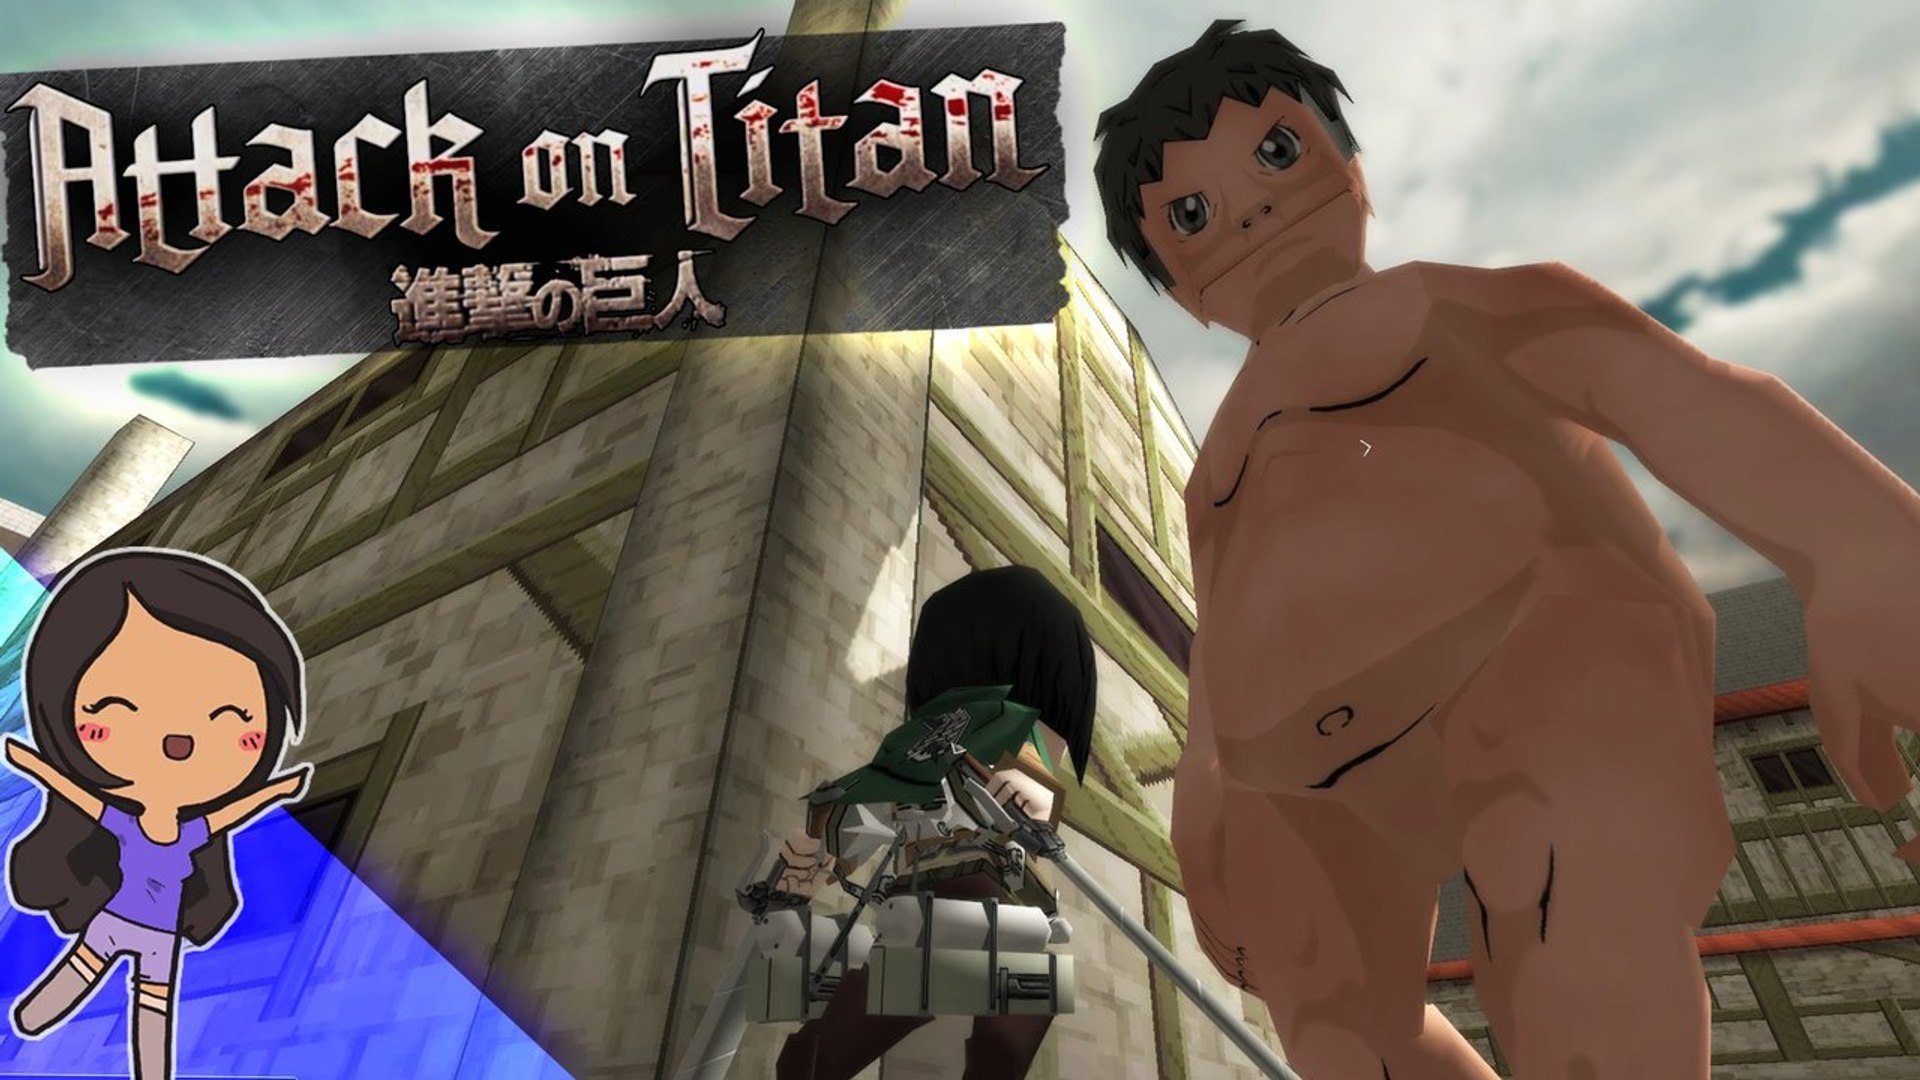 Let's Play Attack on Titan Tribute Game in Browser / Client Online